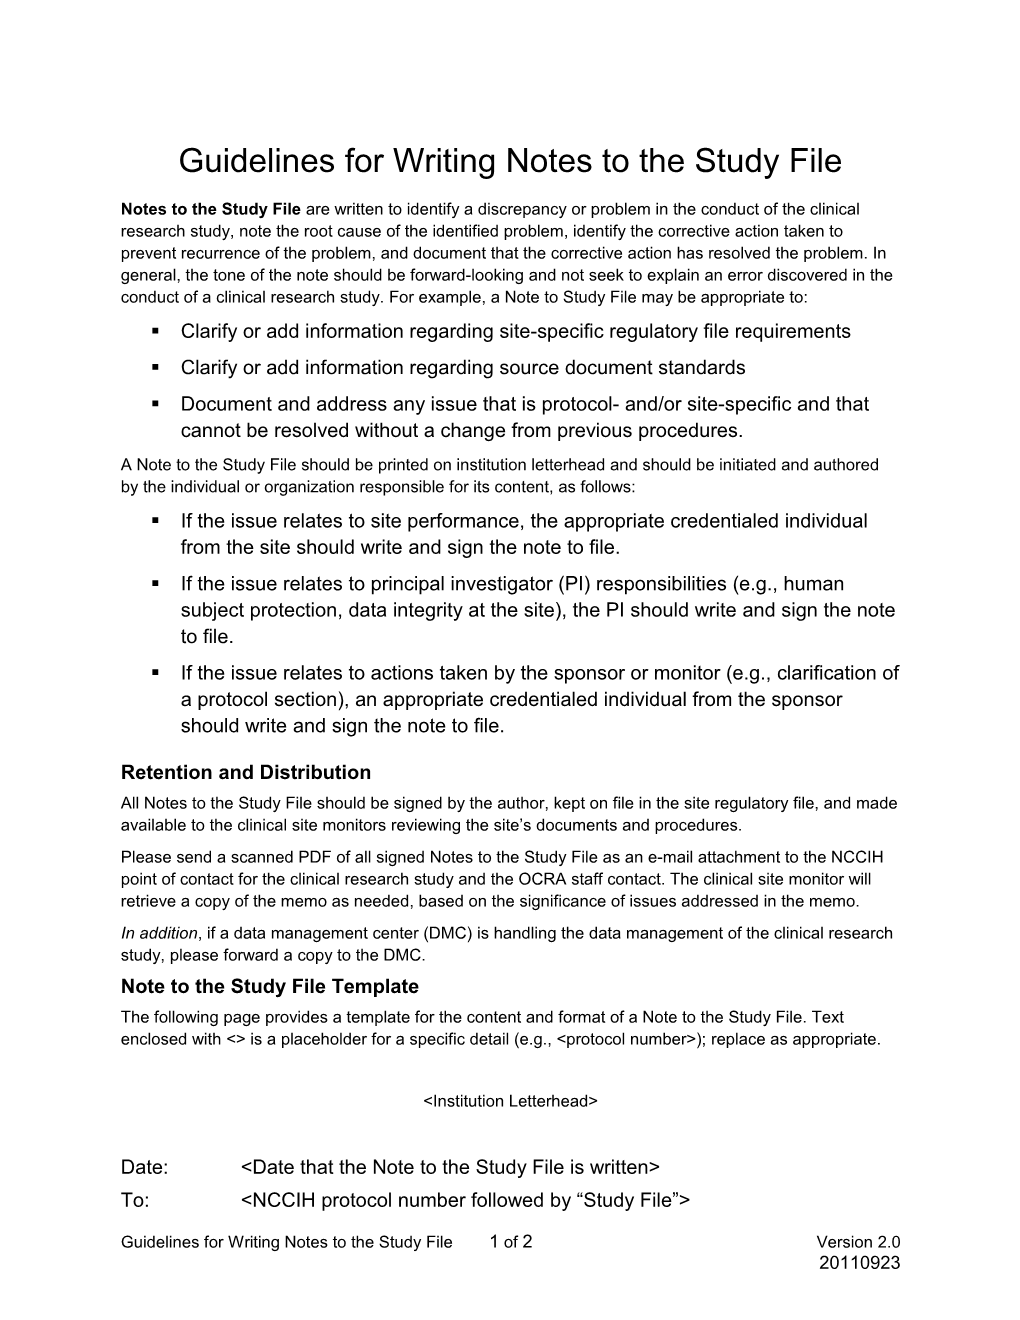 Guidelines for Writing Notes to the Study File